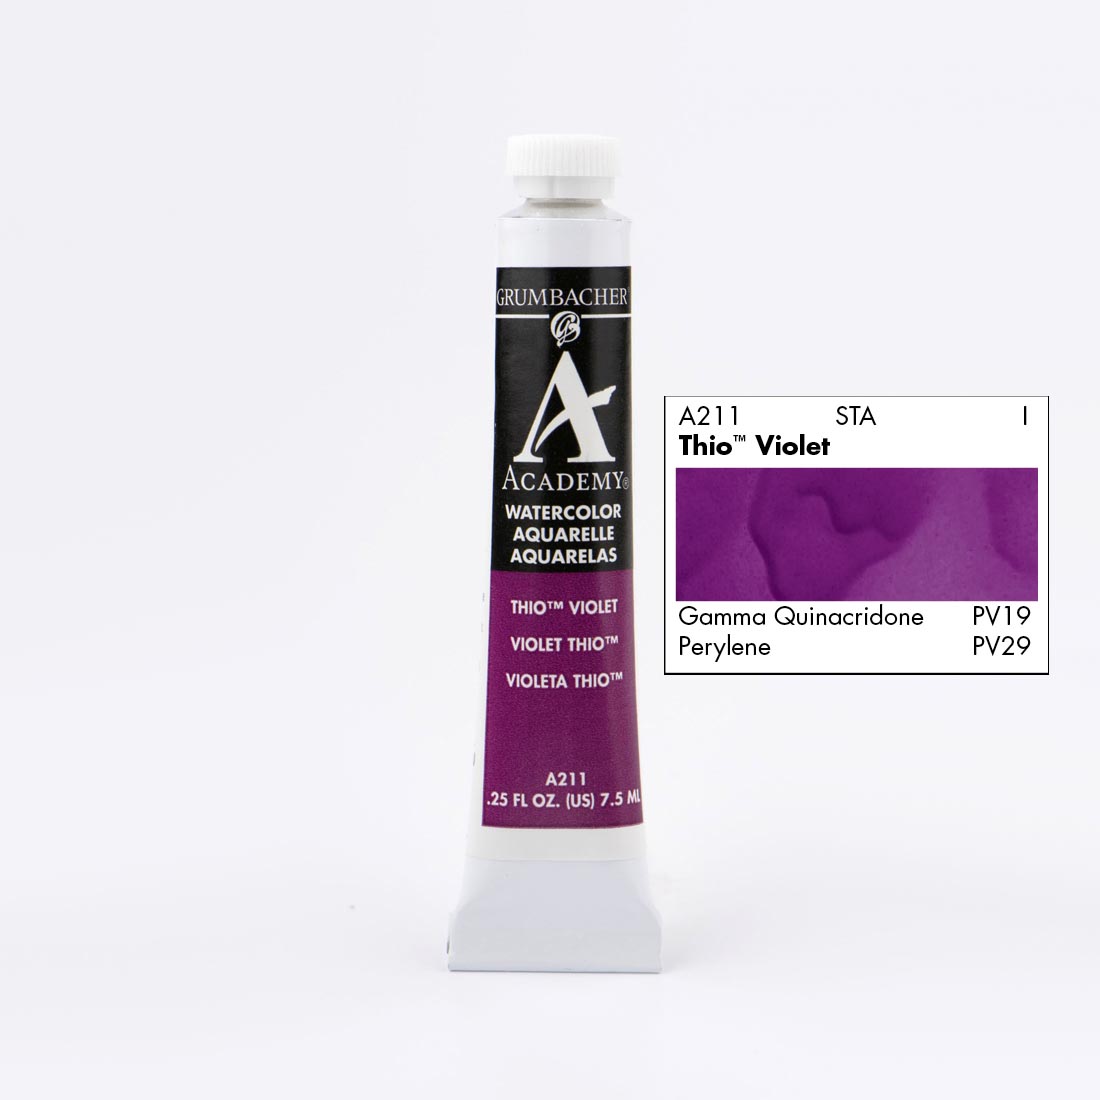 Tube of Grumbacher Academy Watercolor beside Thio Violet color swatch